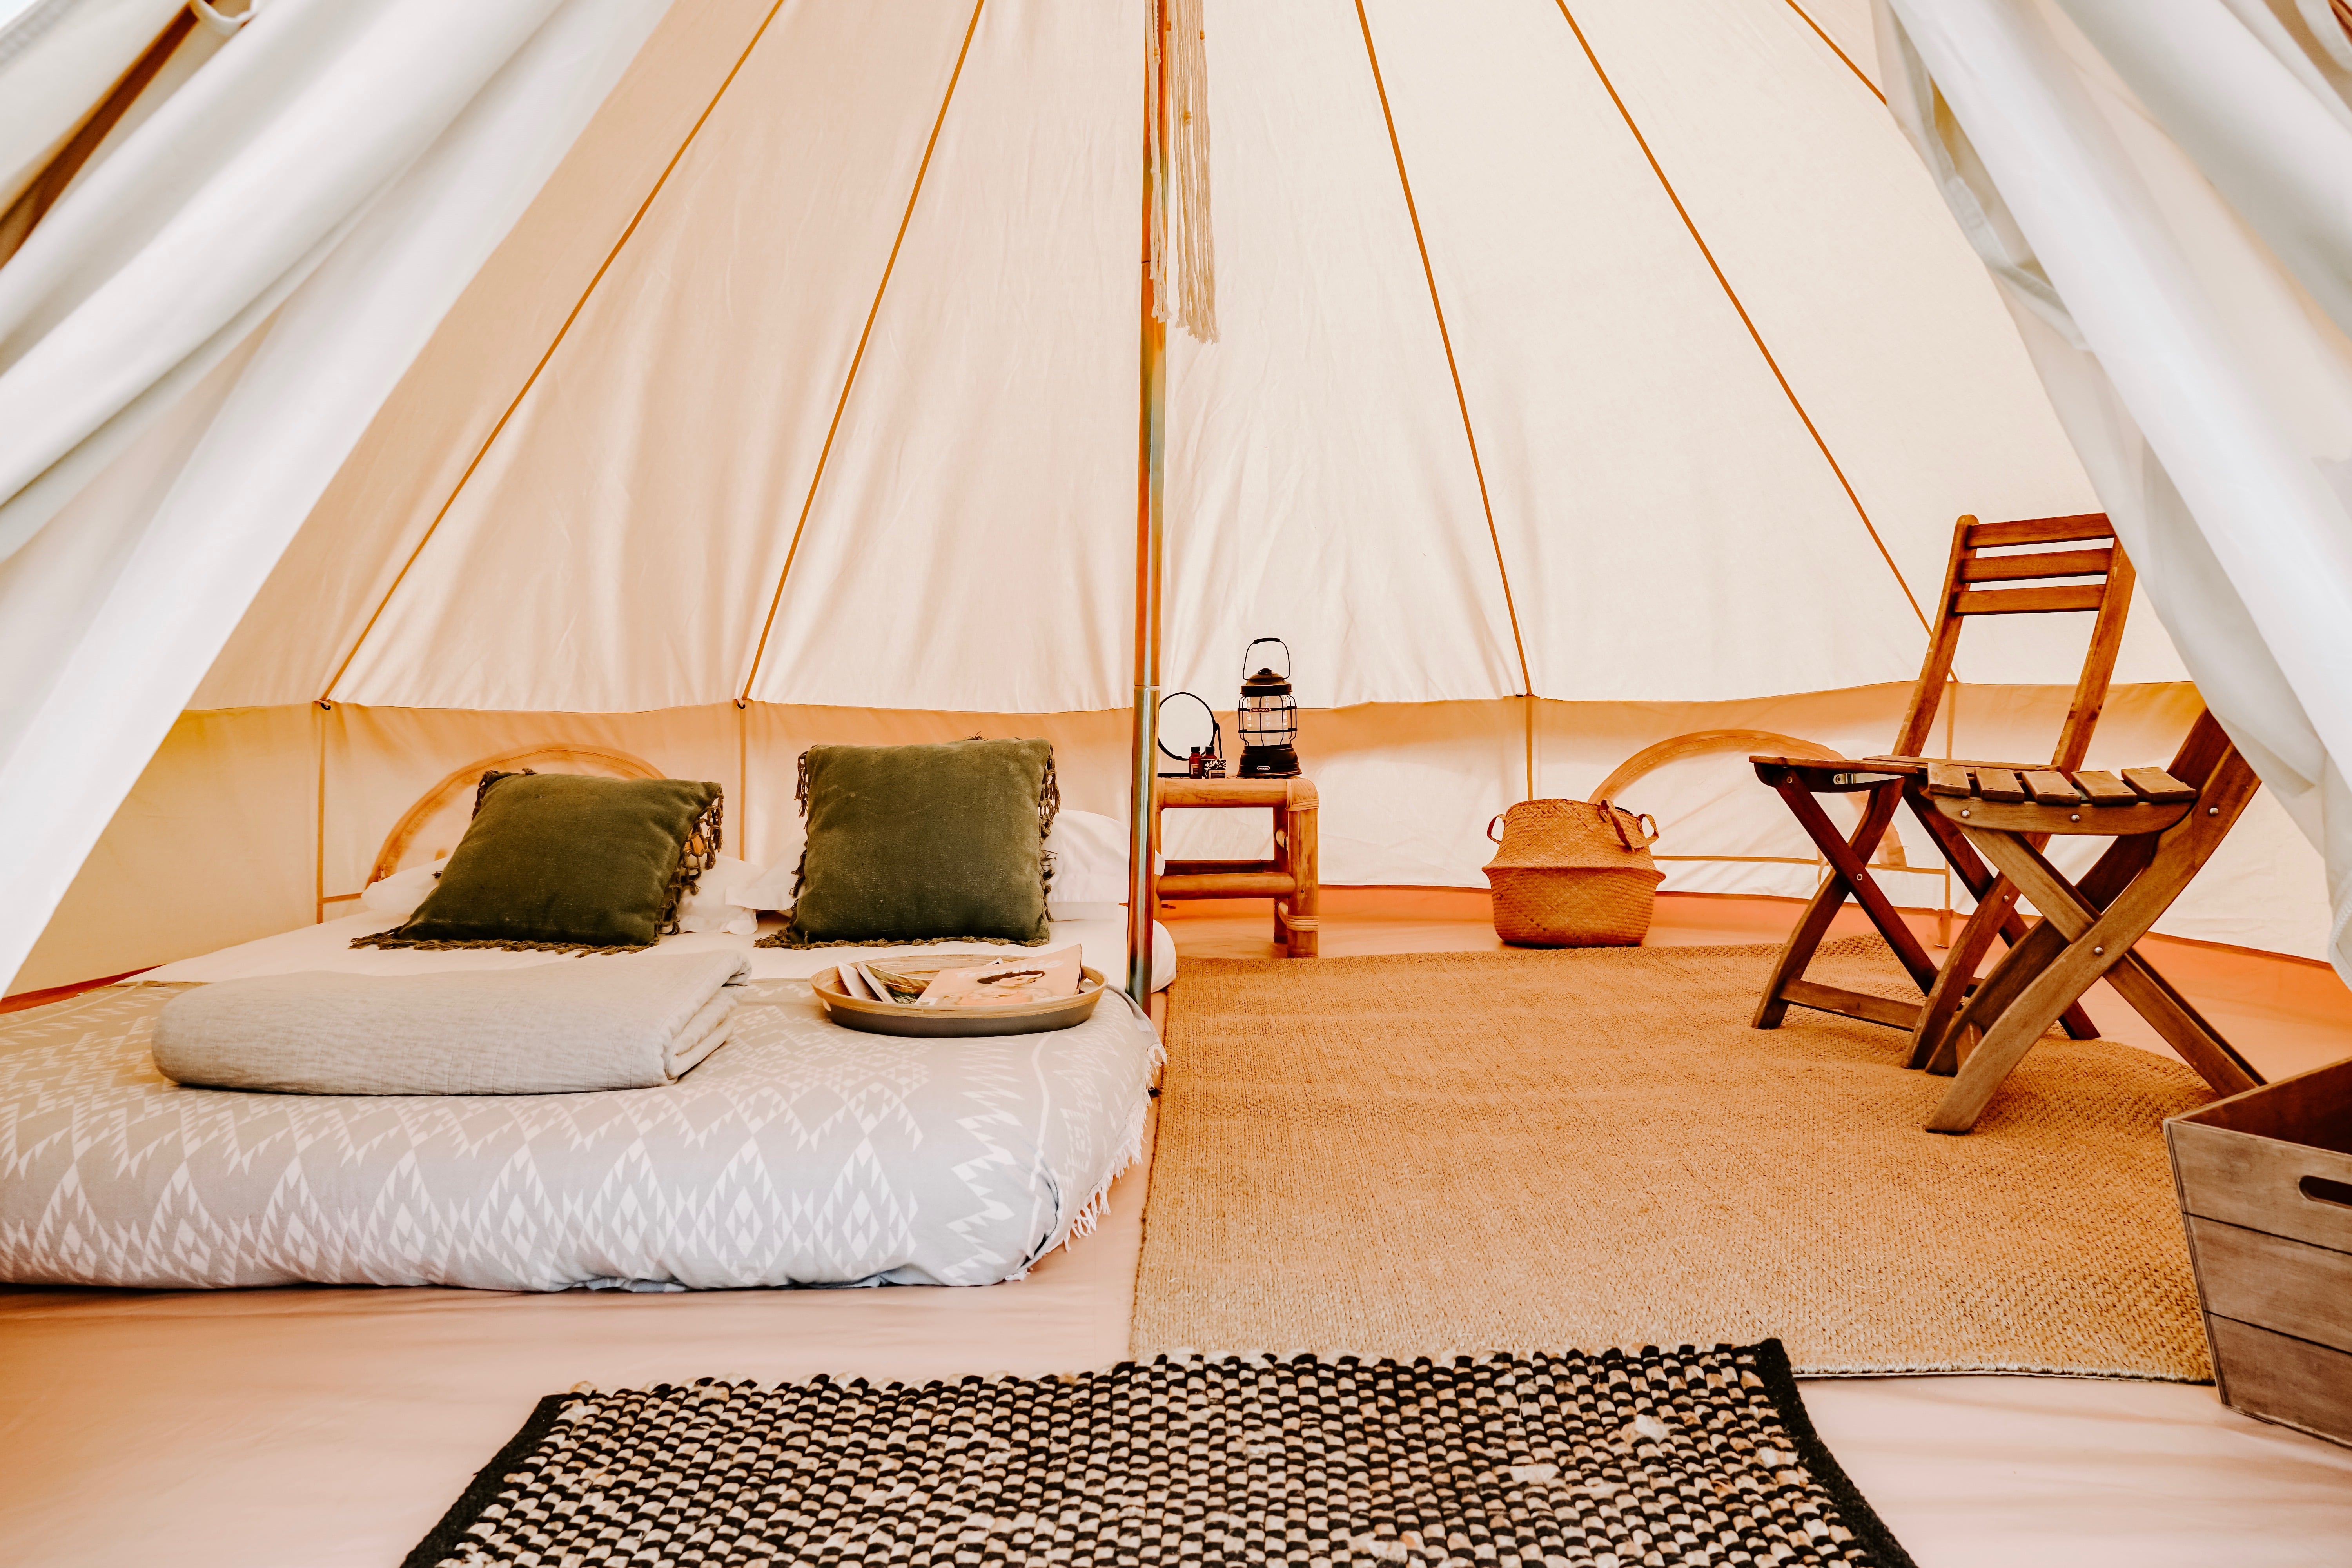 4m bell tent inside with queen bed